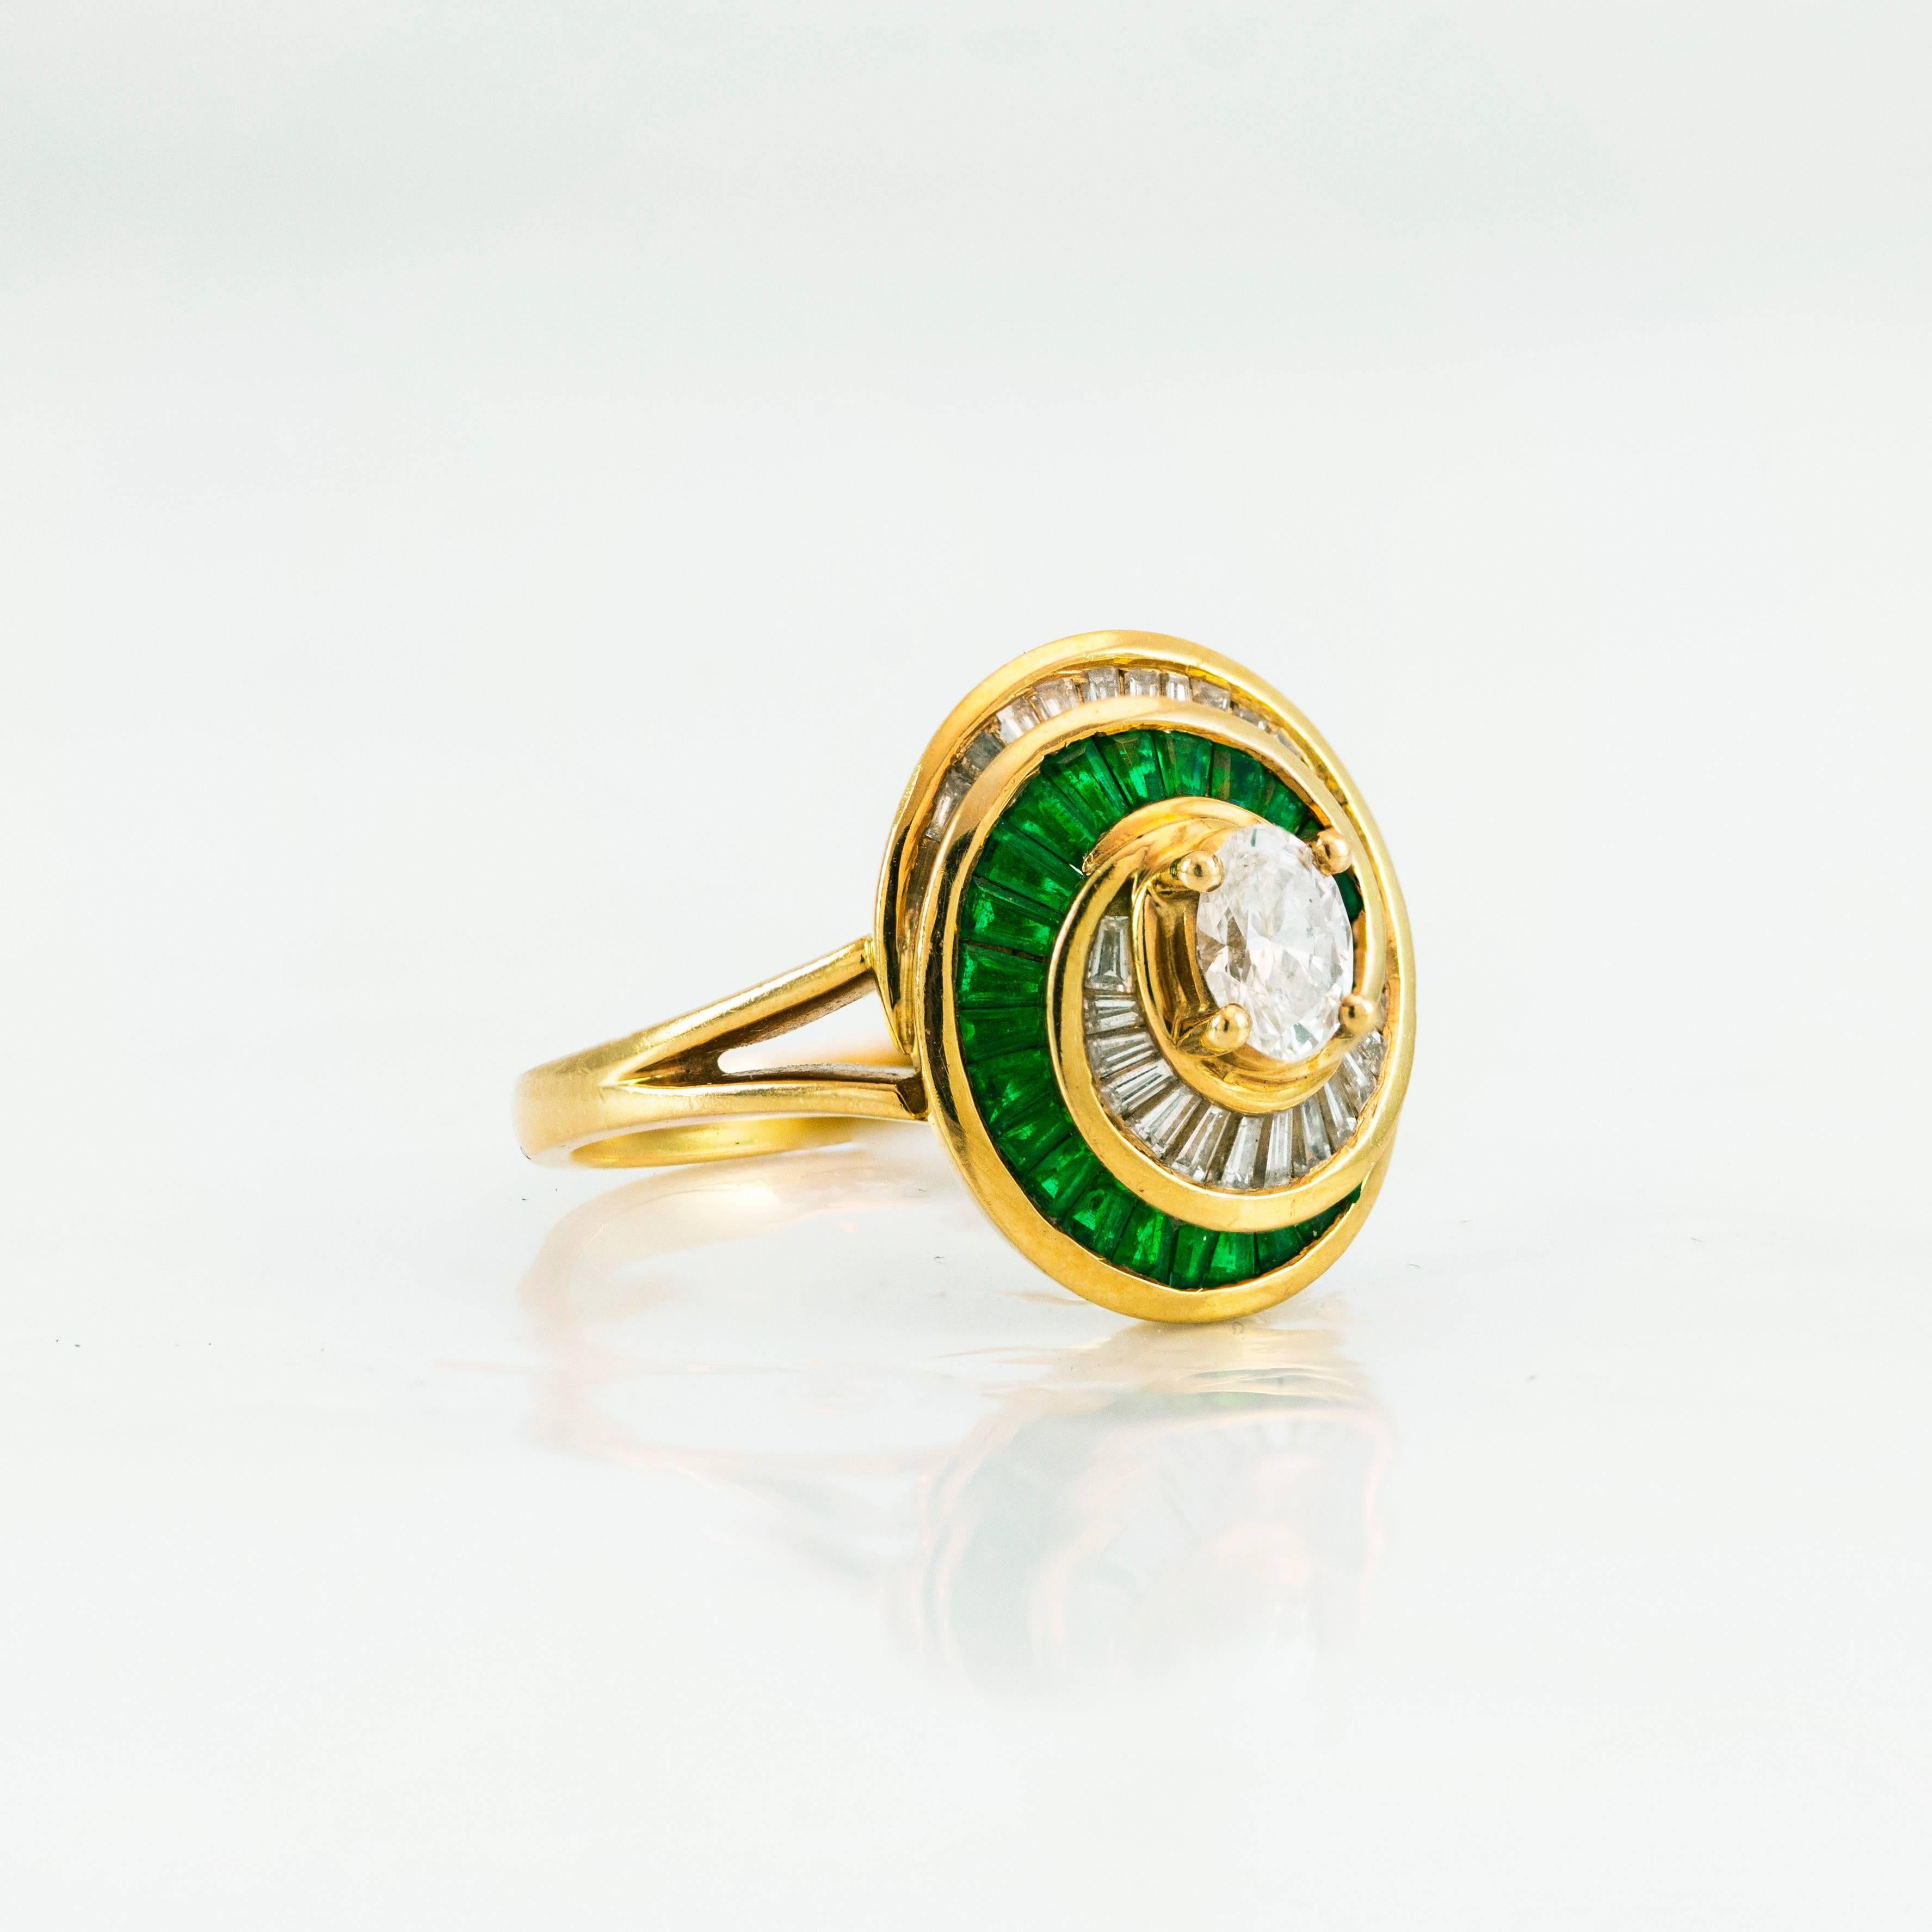 This gorgeous ring features a brilliant oval cut diamond center stone weighing 0.40 carats. The center stone is surrounded by emerald and diamond baguettes in a spiral design. Total weight of the emeralds and diamonds is 0.80 and 0.95 carats